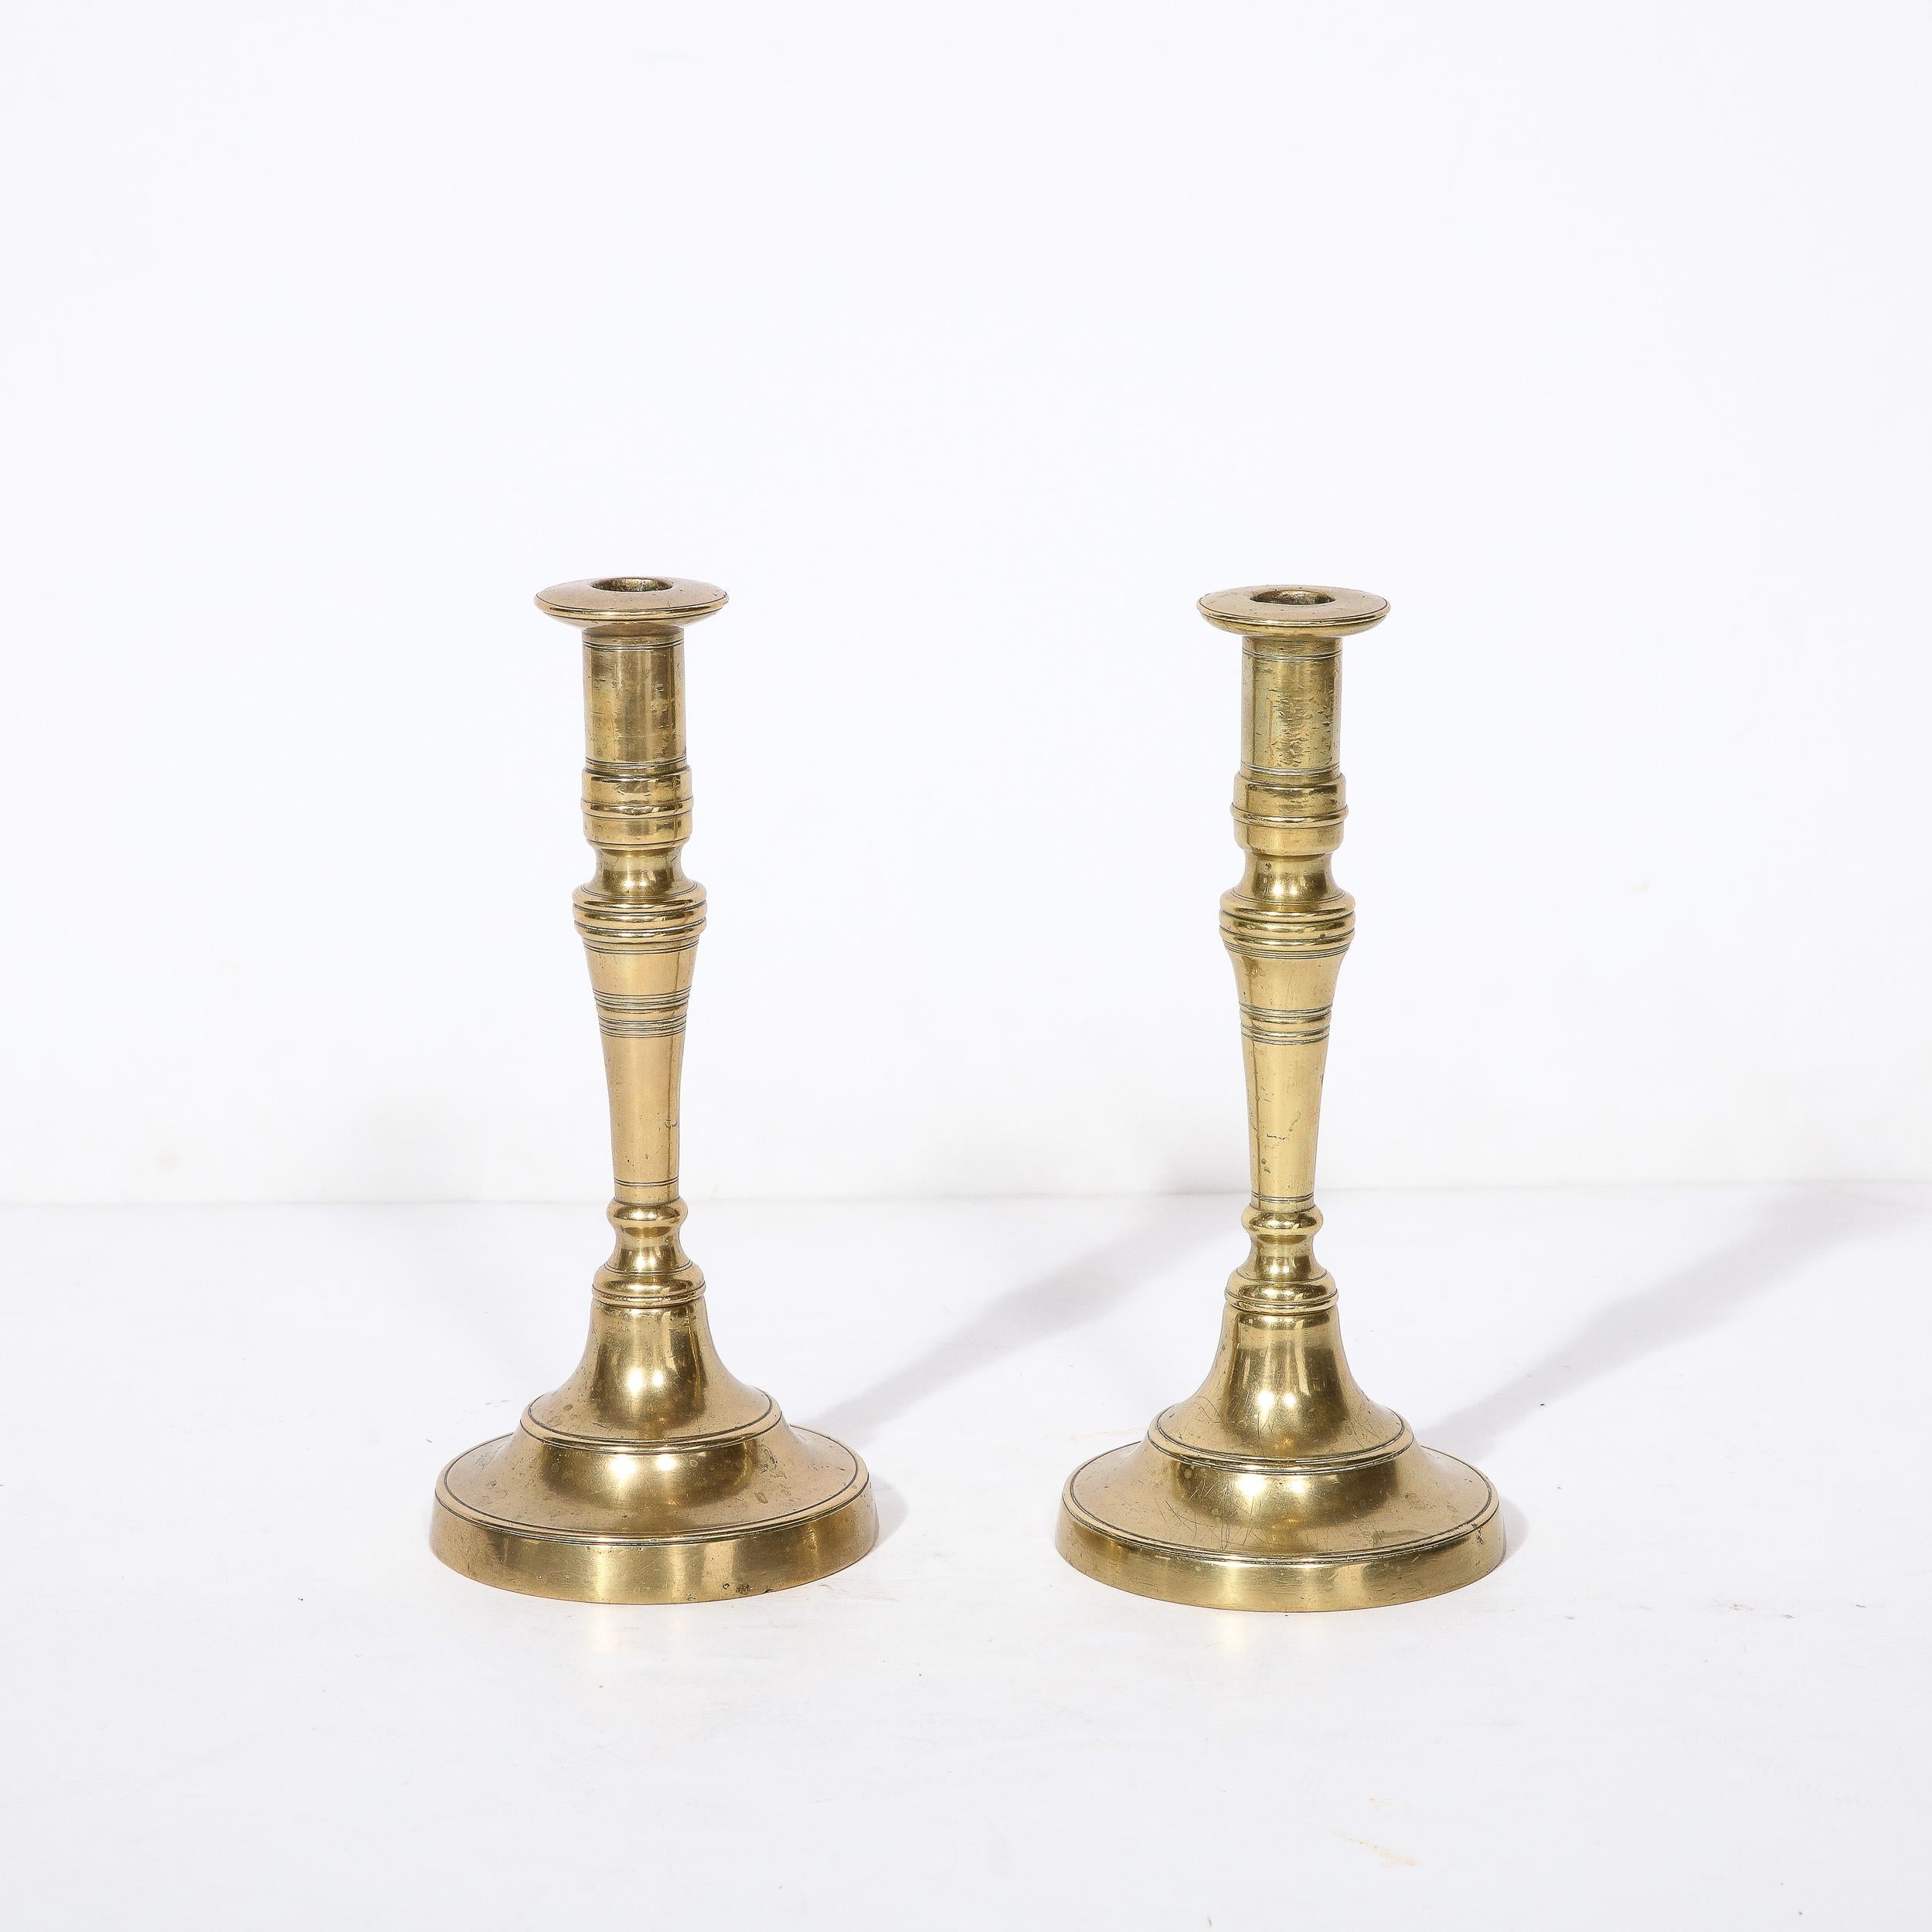 This Pair of Shabbas Candle Holders, rendered in hand wrought  brass with refined and classical banded detailing originate from the United States, Circa 1910. Designed to be lit prior to sunset to honor the coming Sabbath in Jewish life, the usage